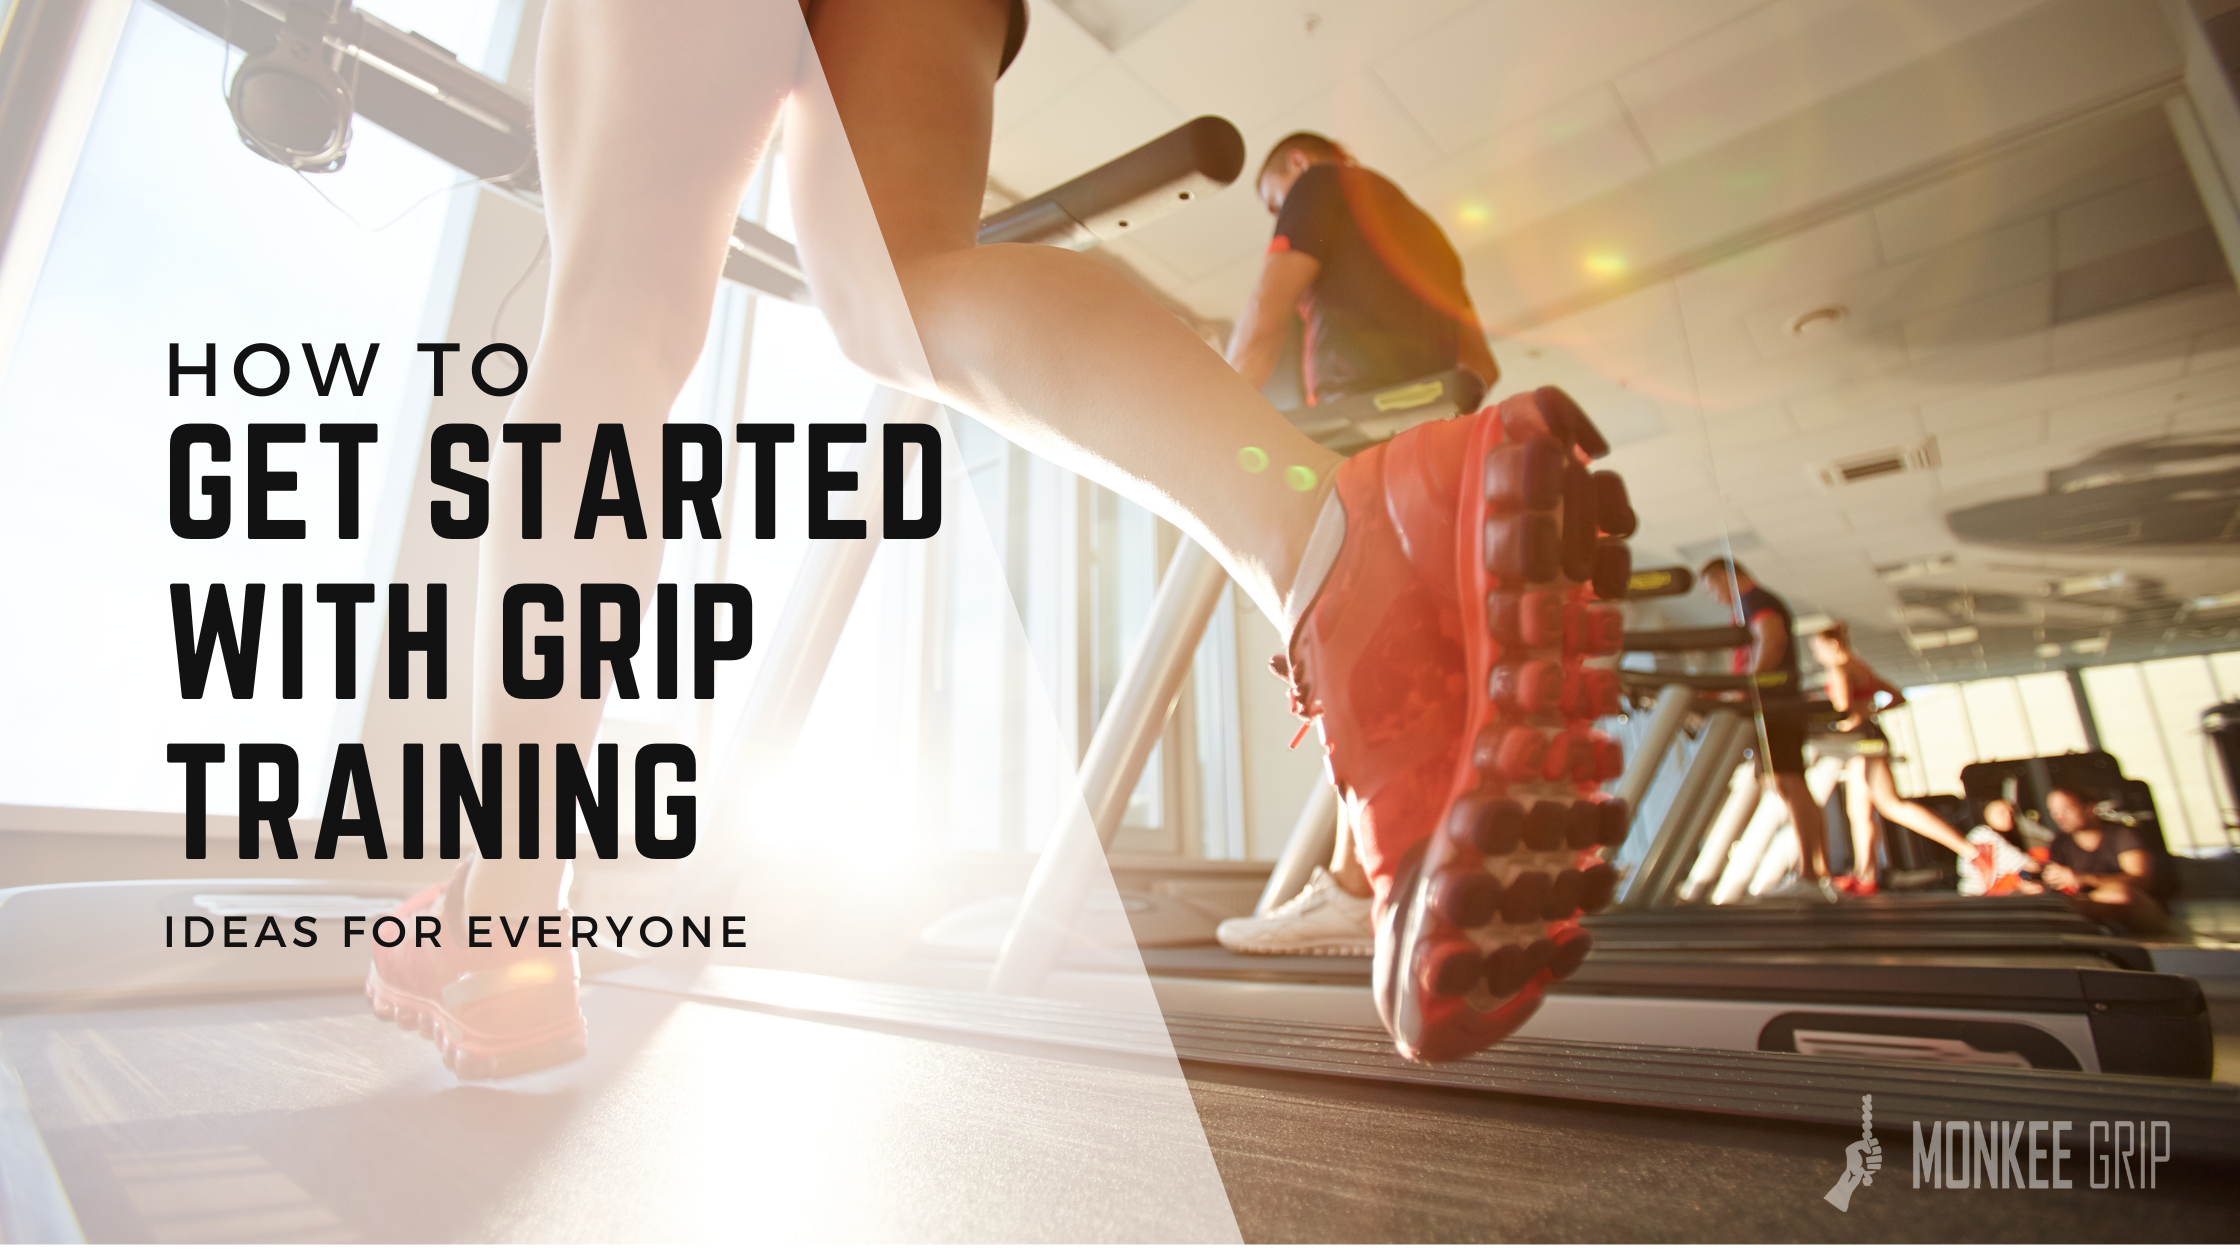 How to: Getting Started with Grip Training